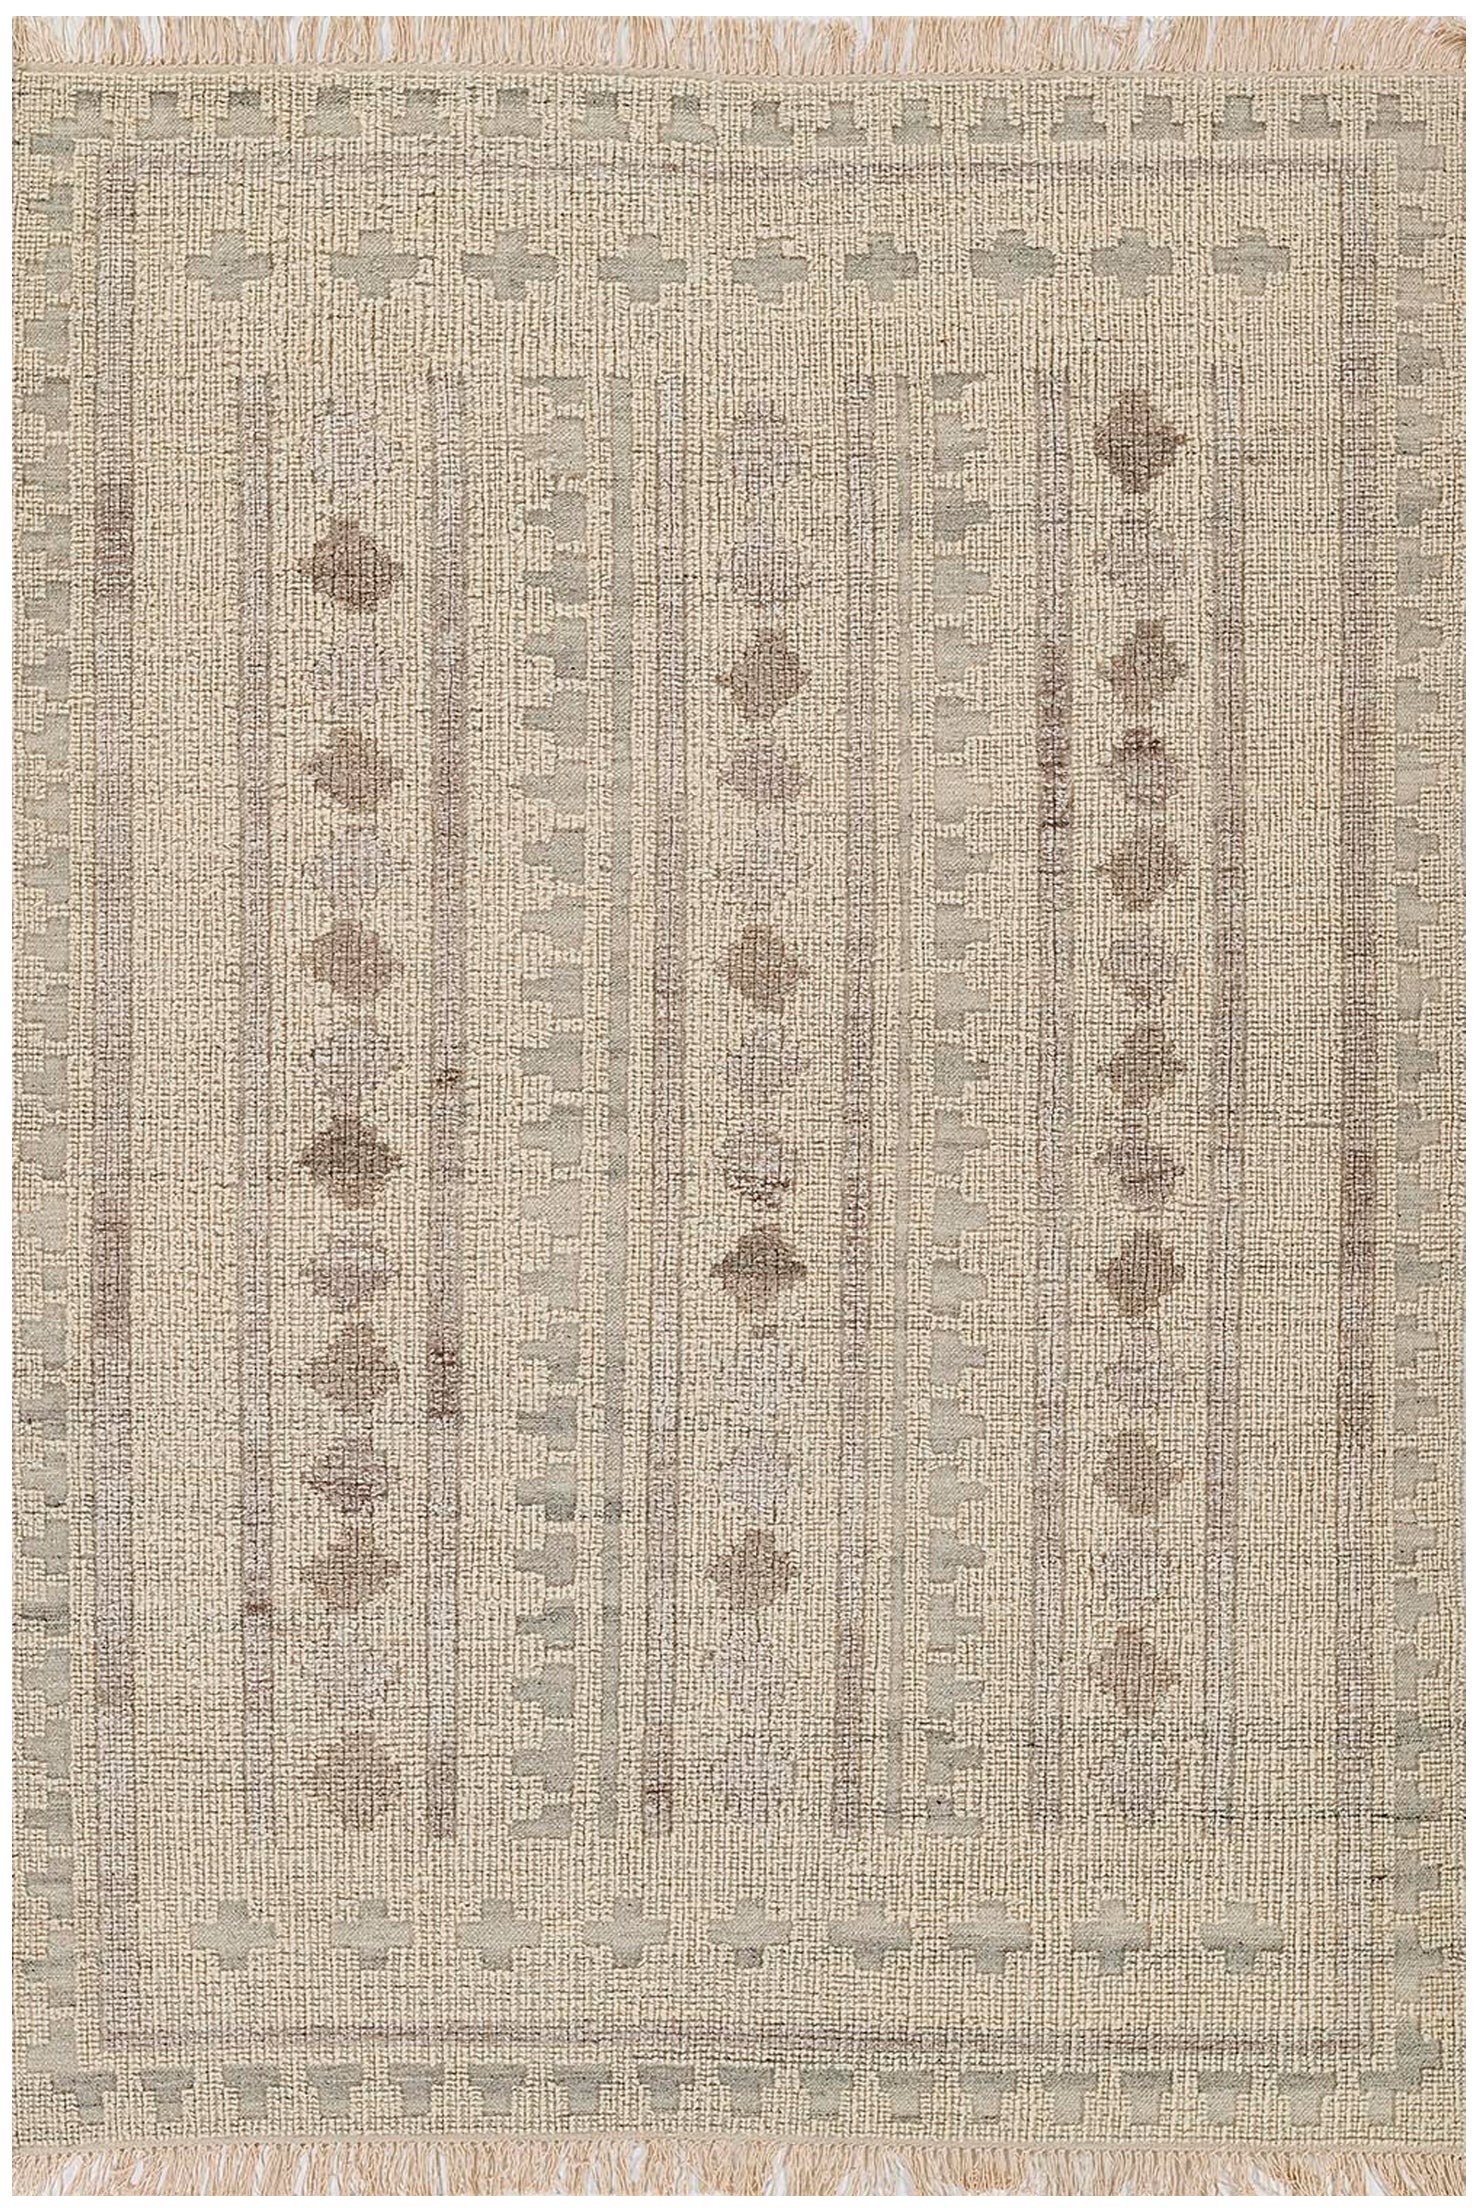 Tribal Hand Woven Wool & Cotton Ivory Tone Area Rug